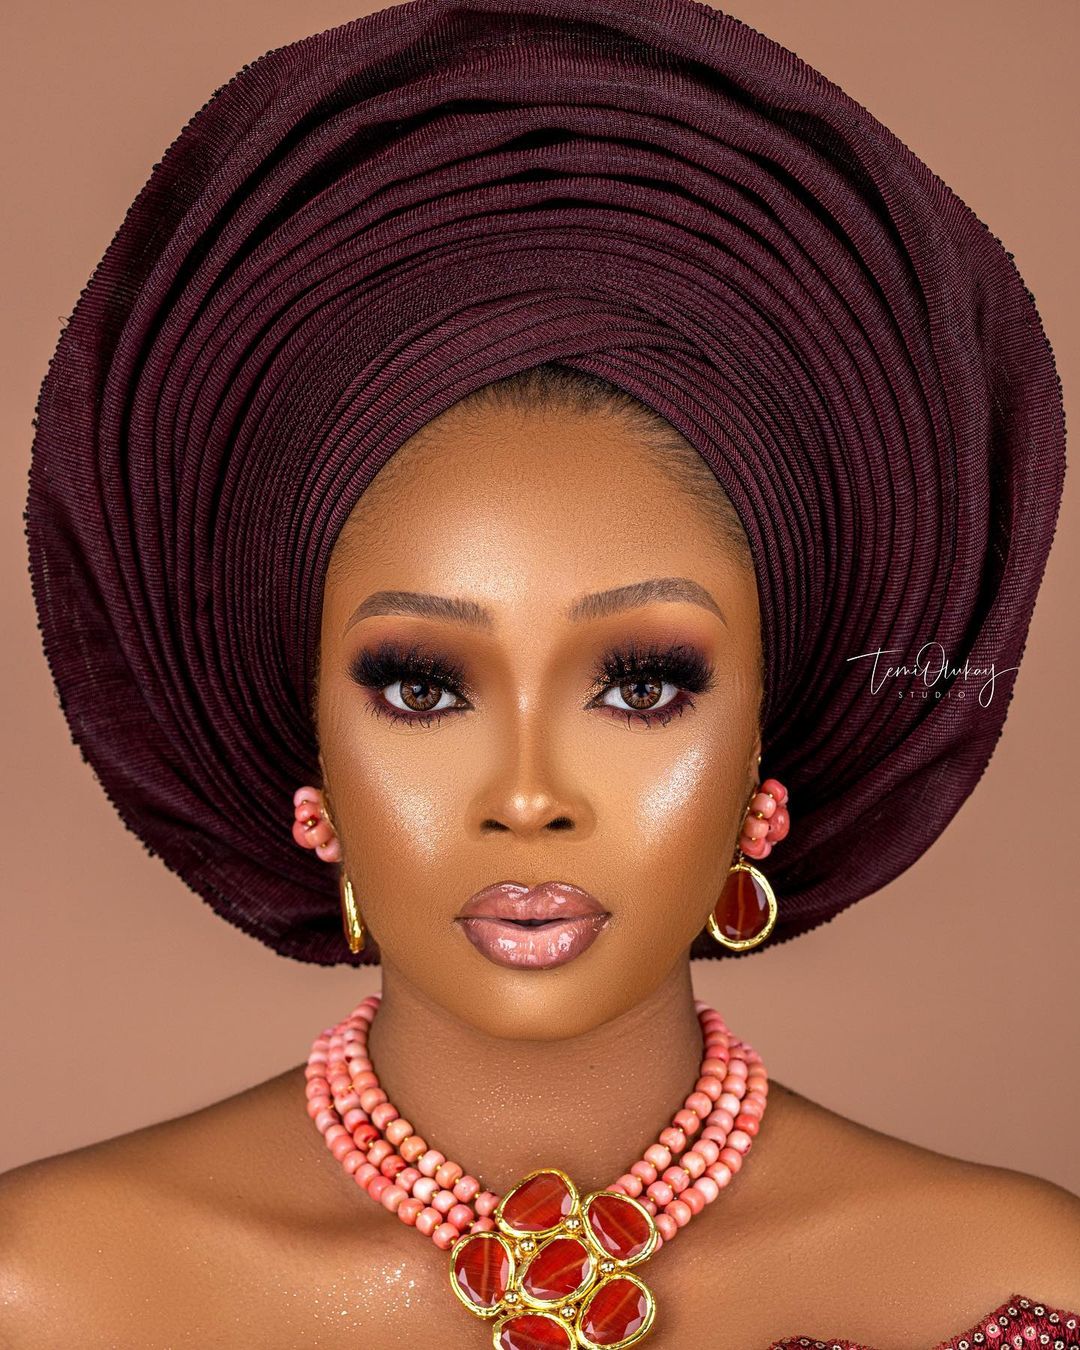 You Can Get Your Trad Glam With This Amazing Look!